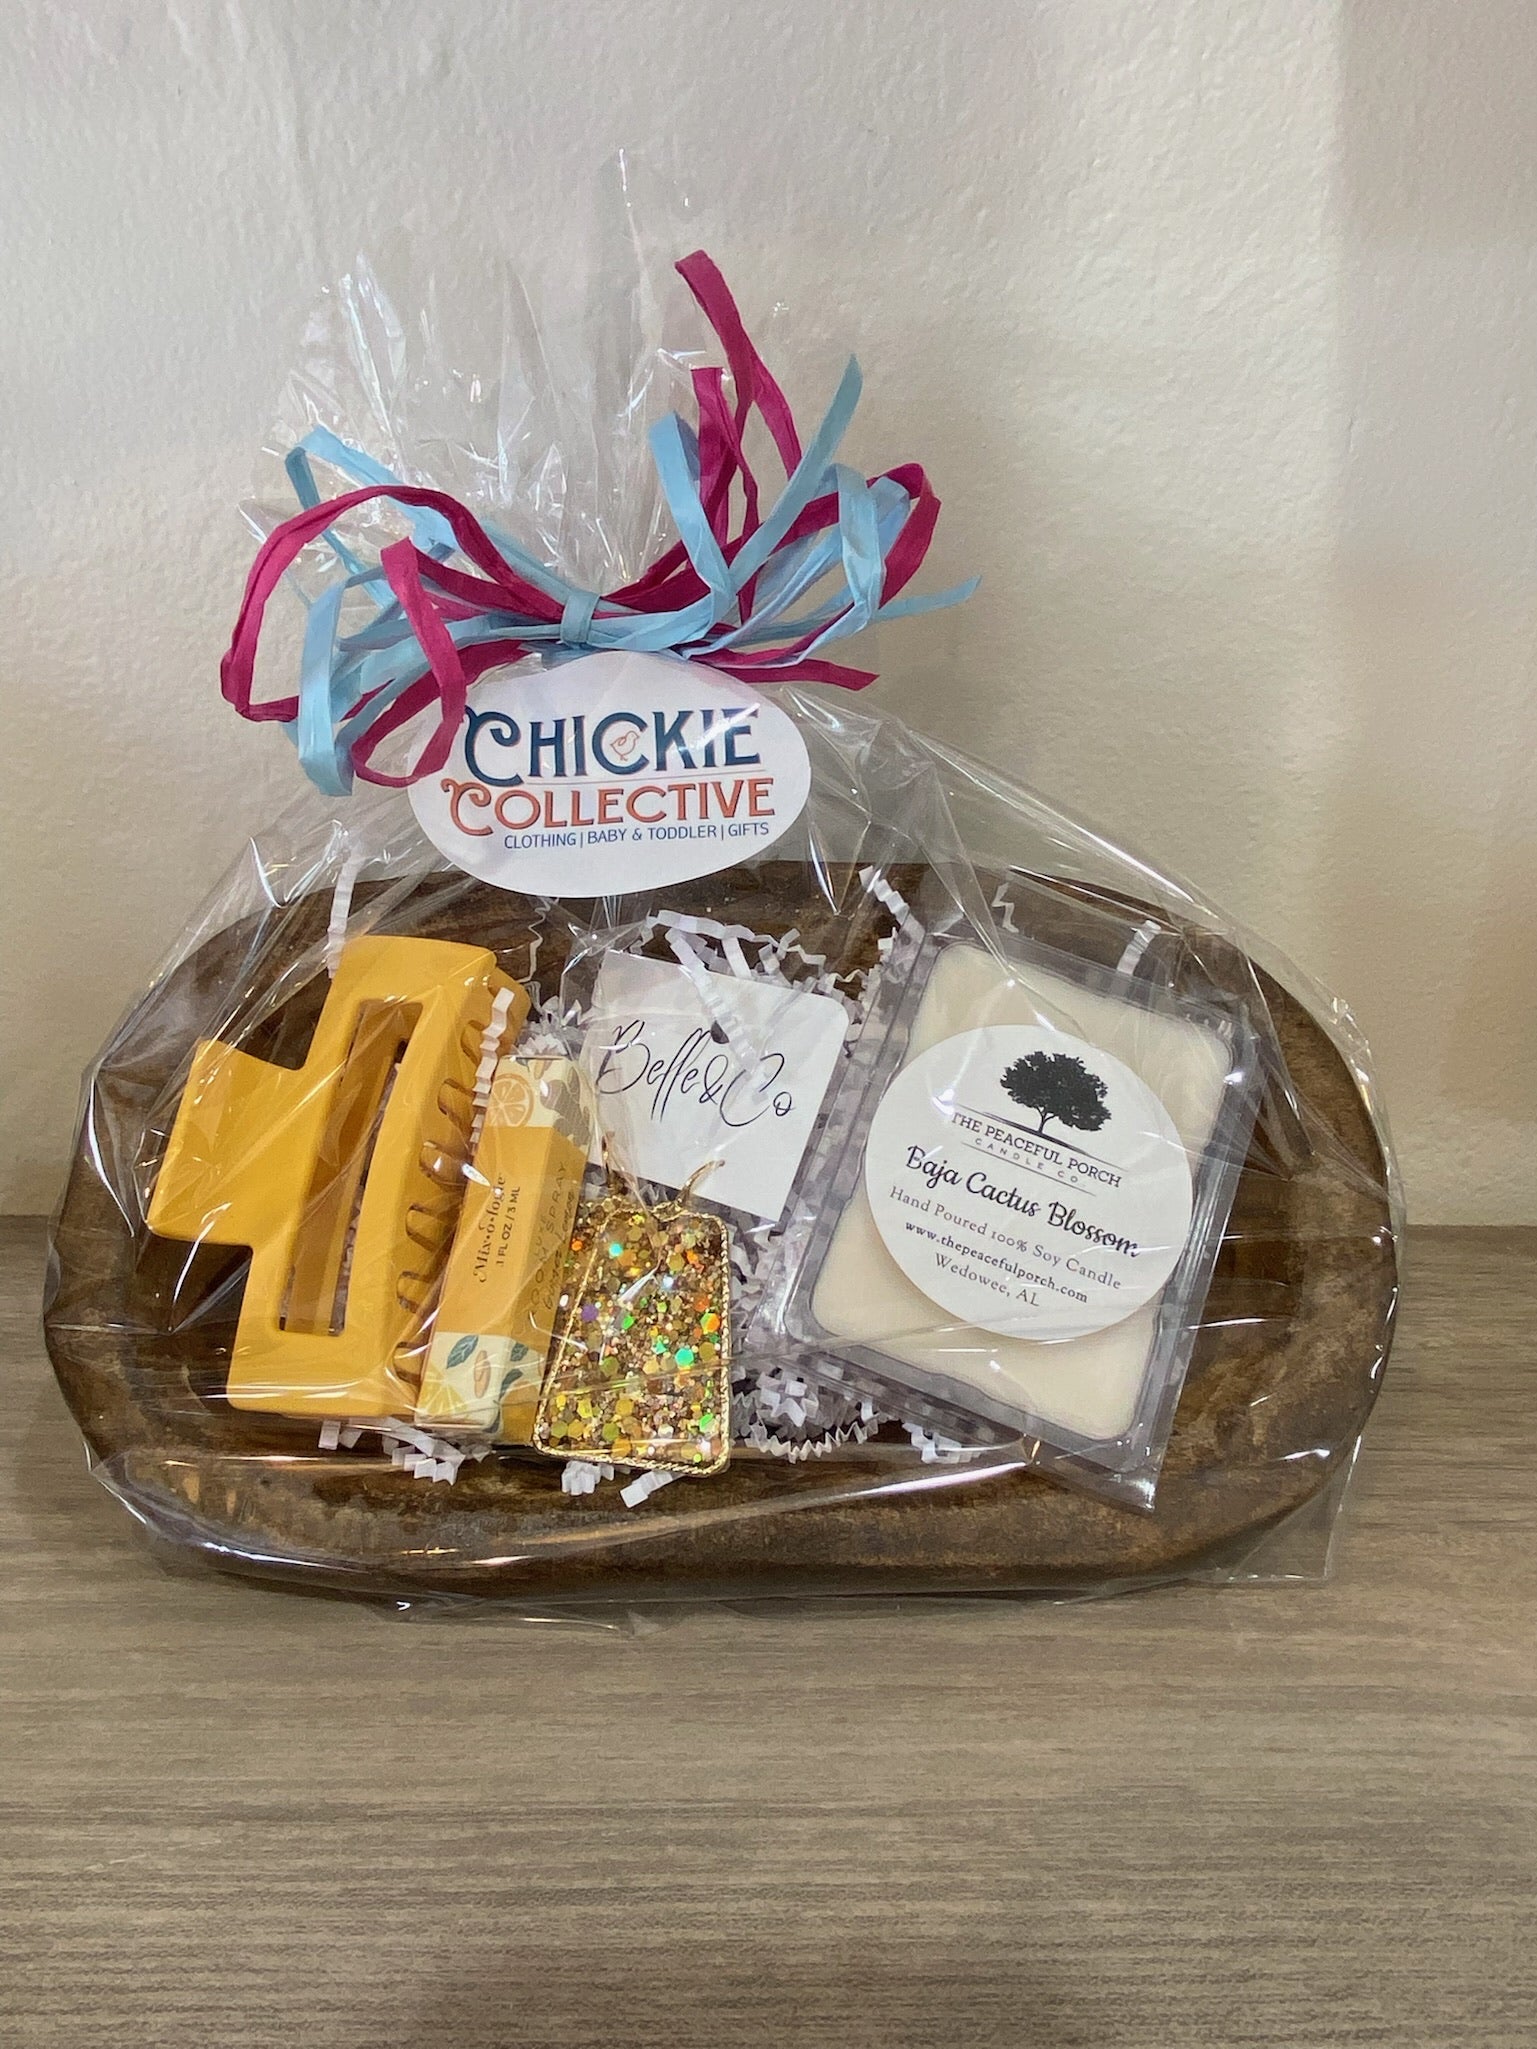 The Chickie Collective Everyday Bundle gift basket efficiently streamlines a candle and a gift card for a perfect present.